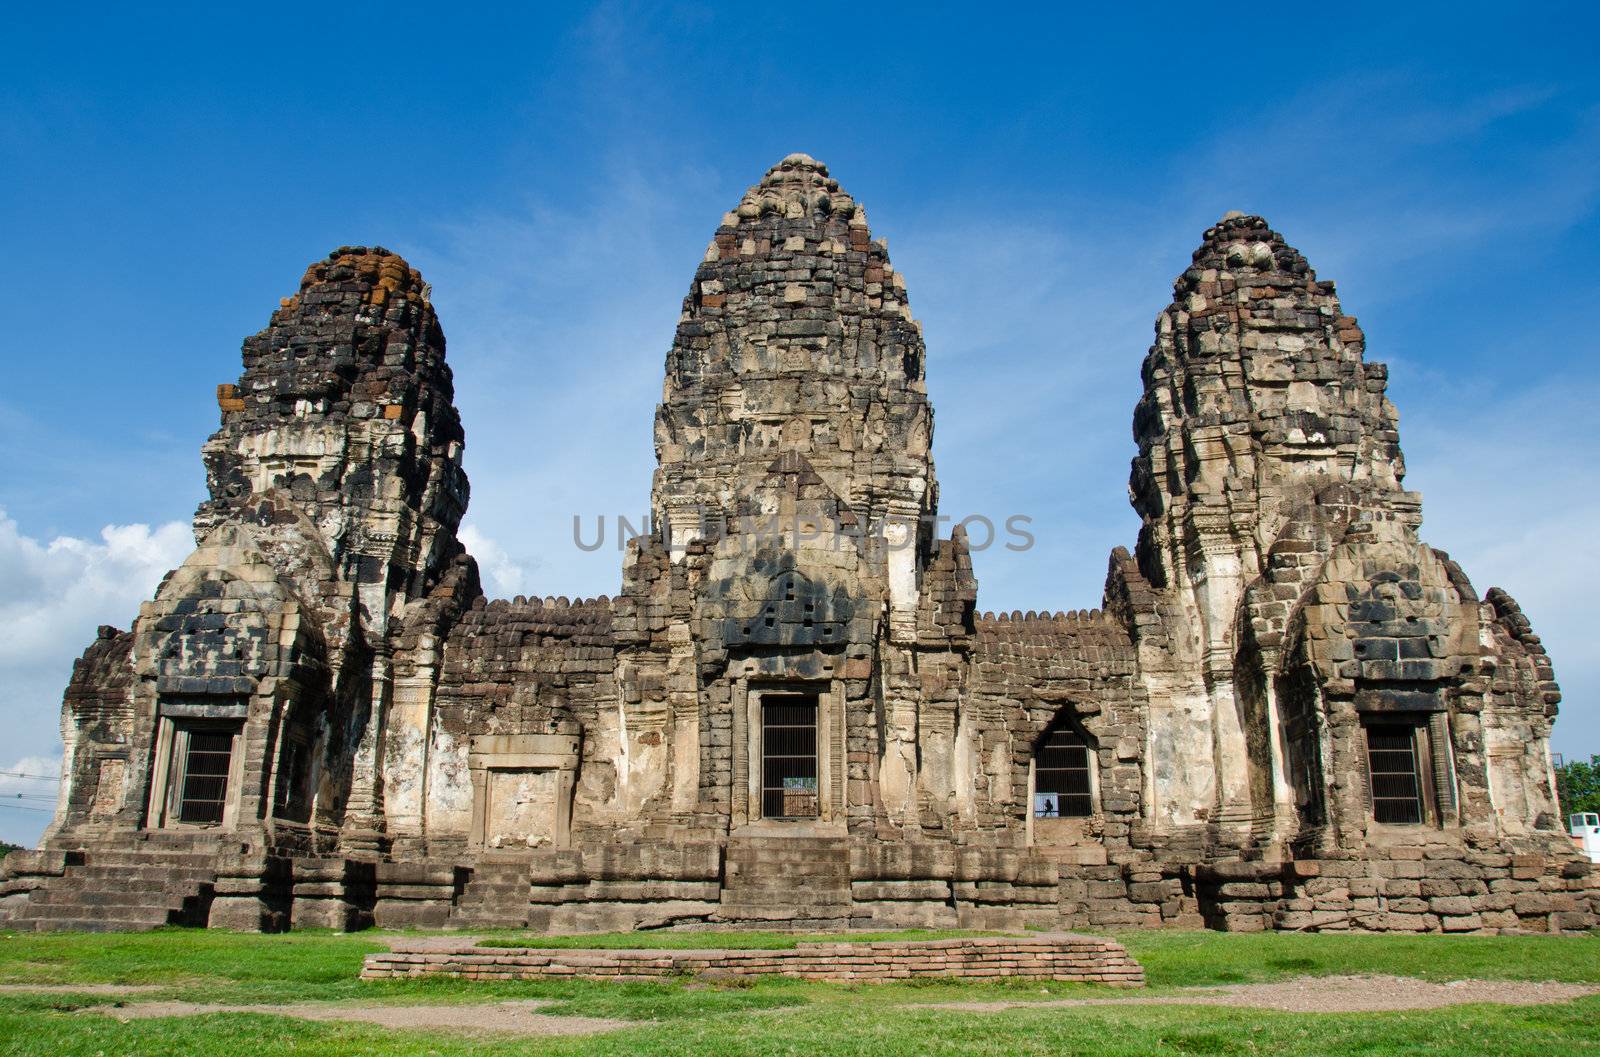 Religious buildings constructed by the ancient Khmer art.